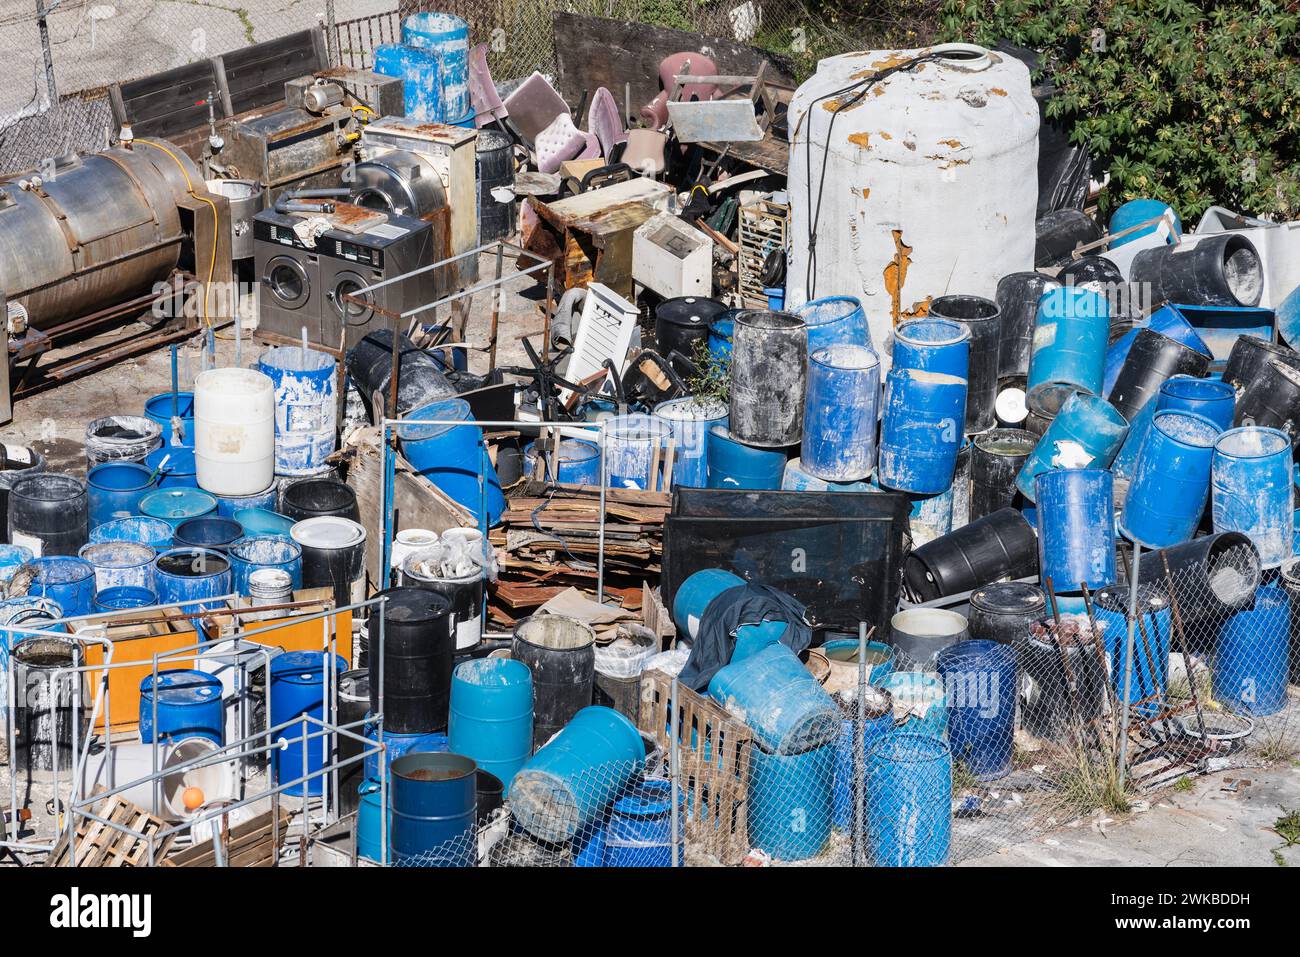 Pile of scary industrial waste barrels, trash and debris in an open outdoor lot. Stock Photo